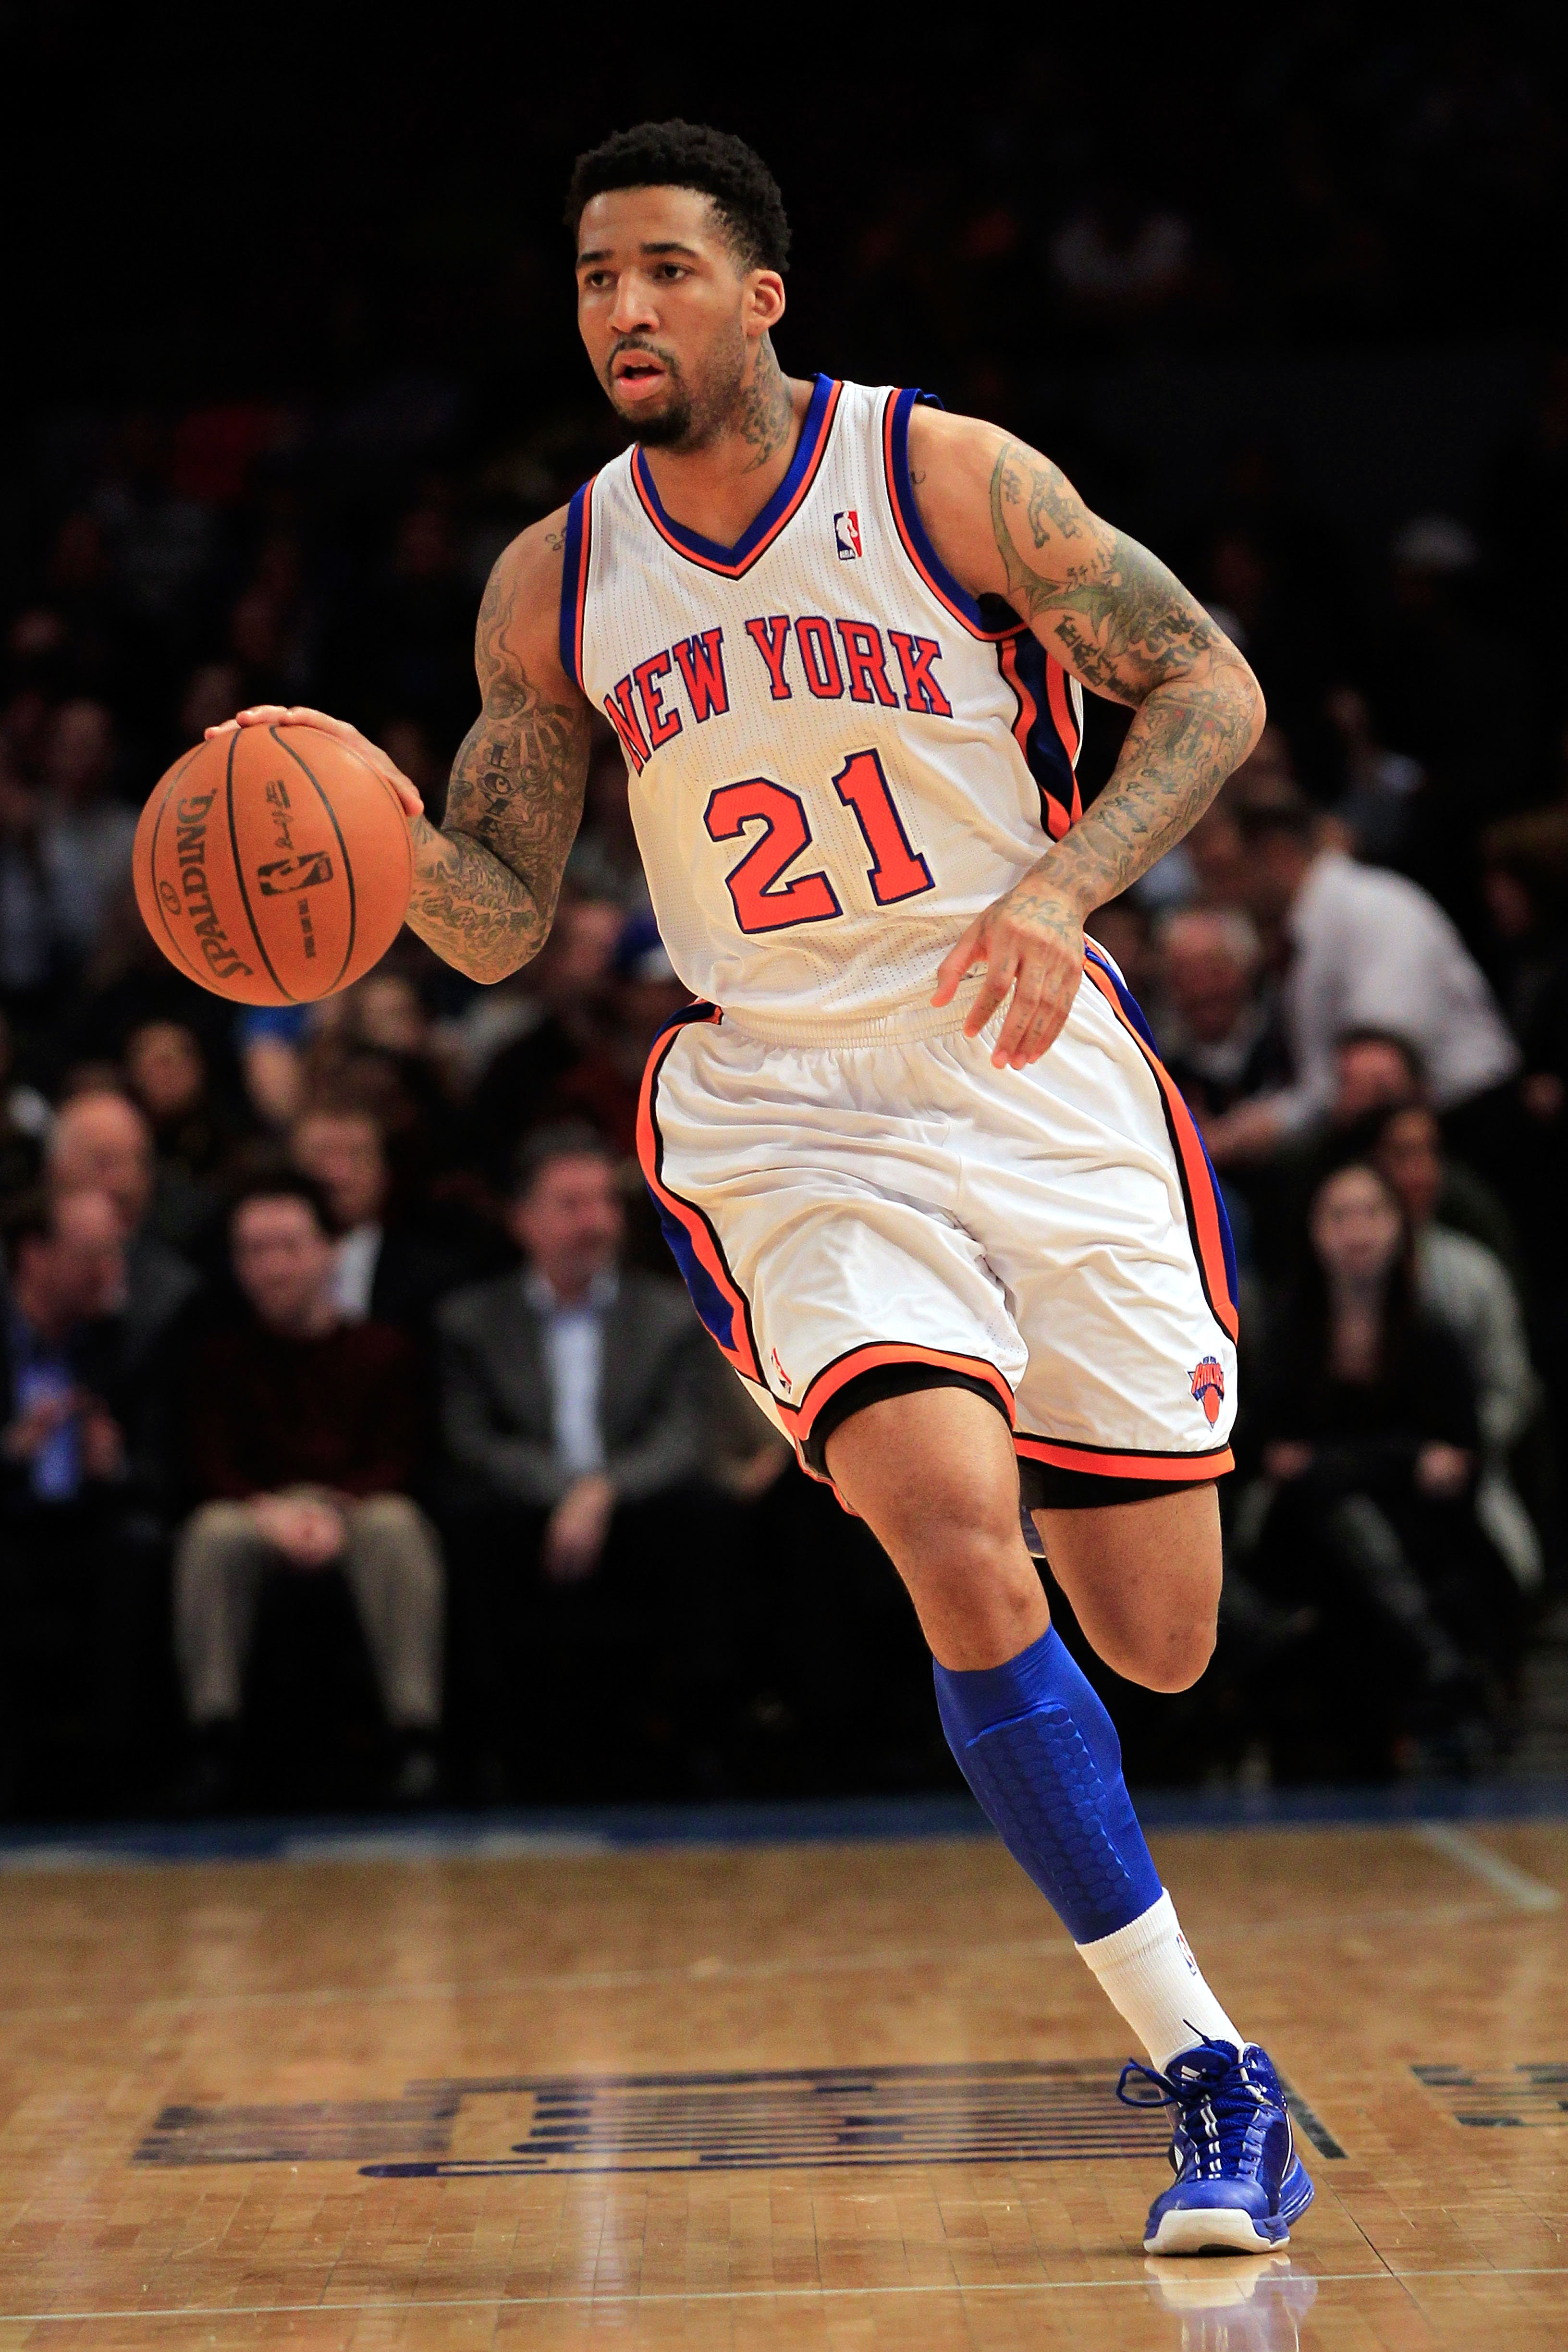 NEW YORK, NY - JANUARY 14: Wilson Chandler #21 of the New York Knicks dribbles against the Sacramento Kings at Madison Square Garden on January 14, 2011 in New York City. NOTE TO USER: User expressly acknowledges and agrees that, by downloading and or usi